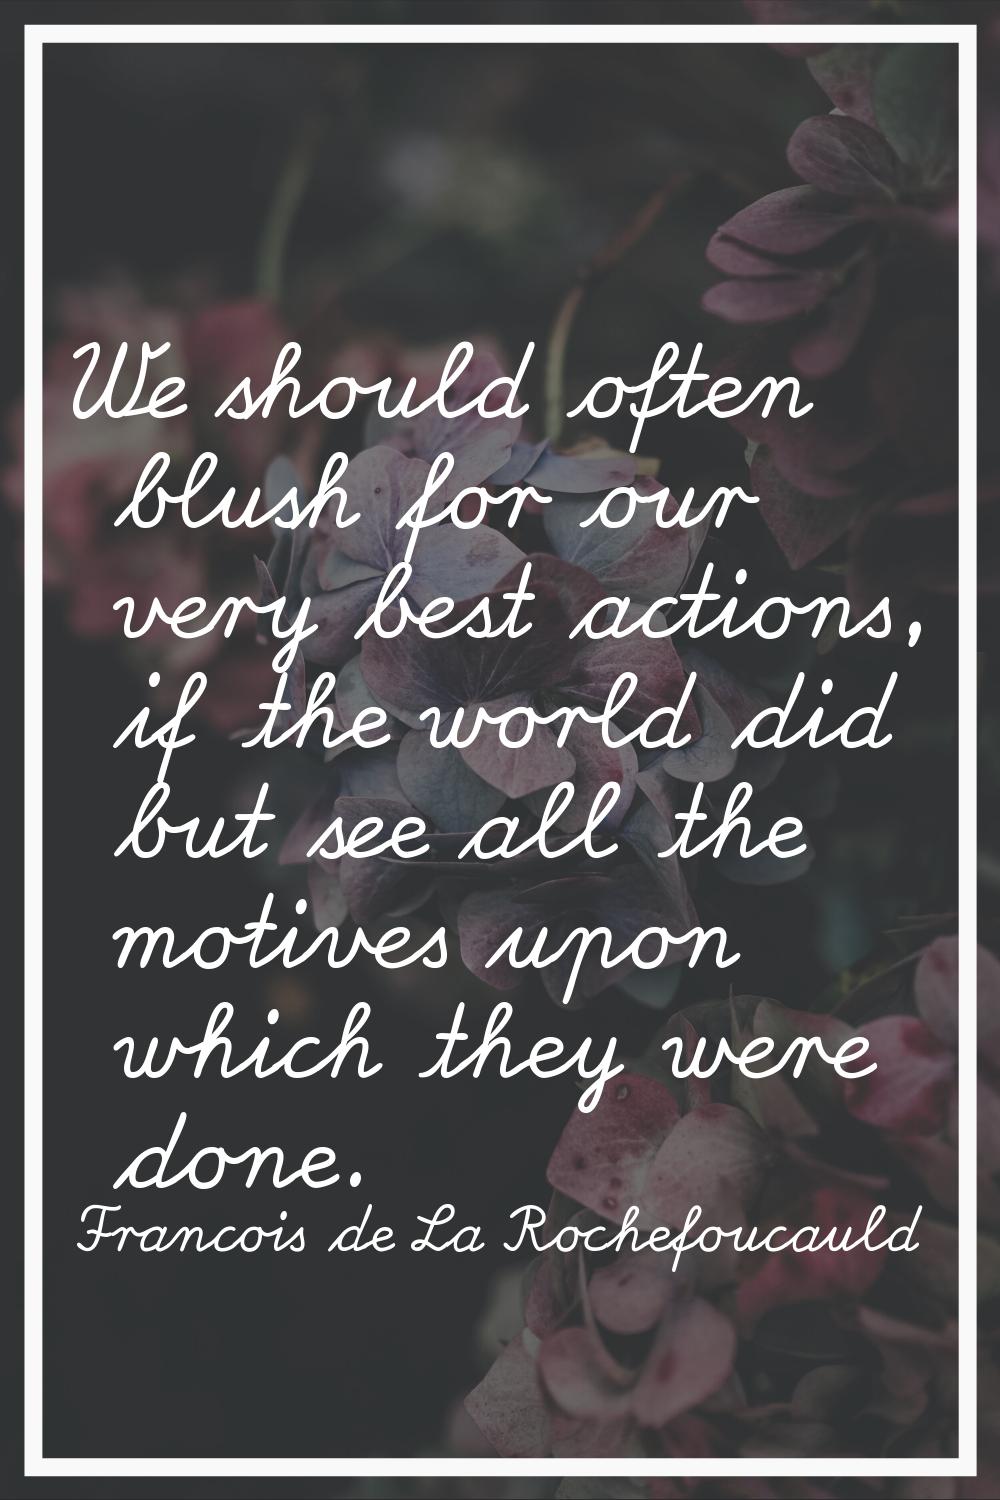 We should often blush for our very best actions, if the world did but see all the motives upon whic